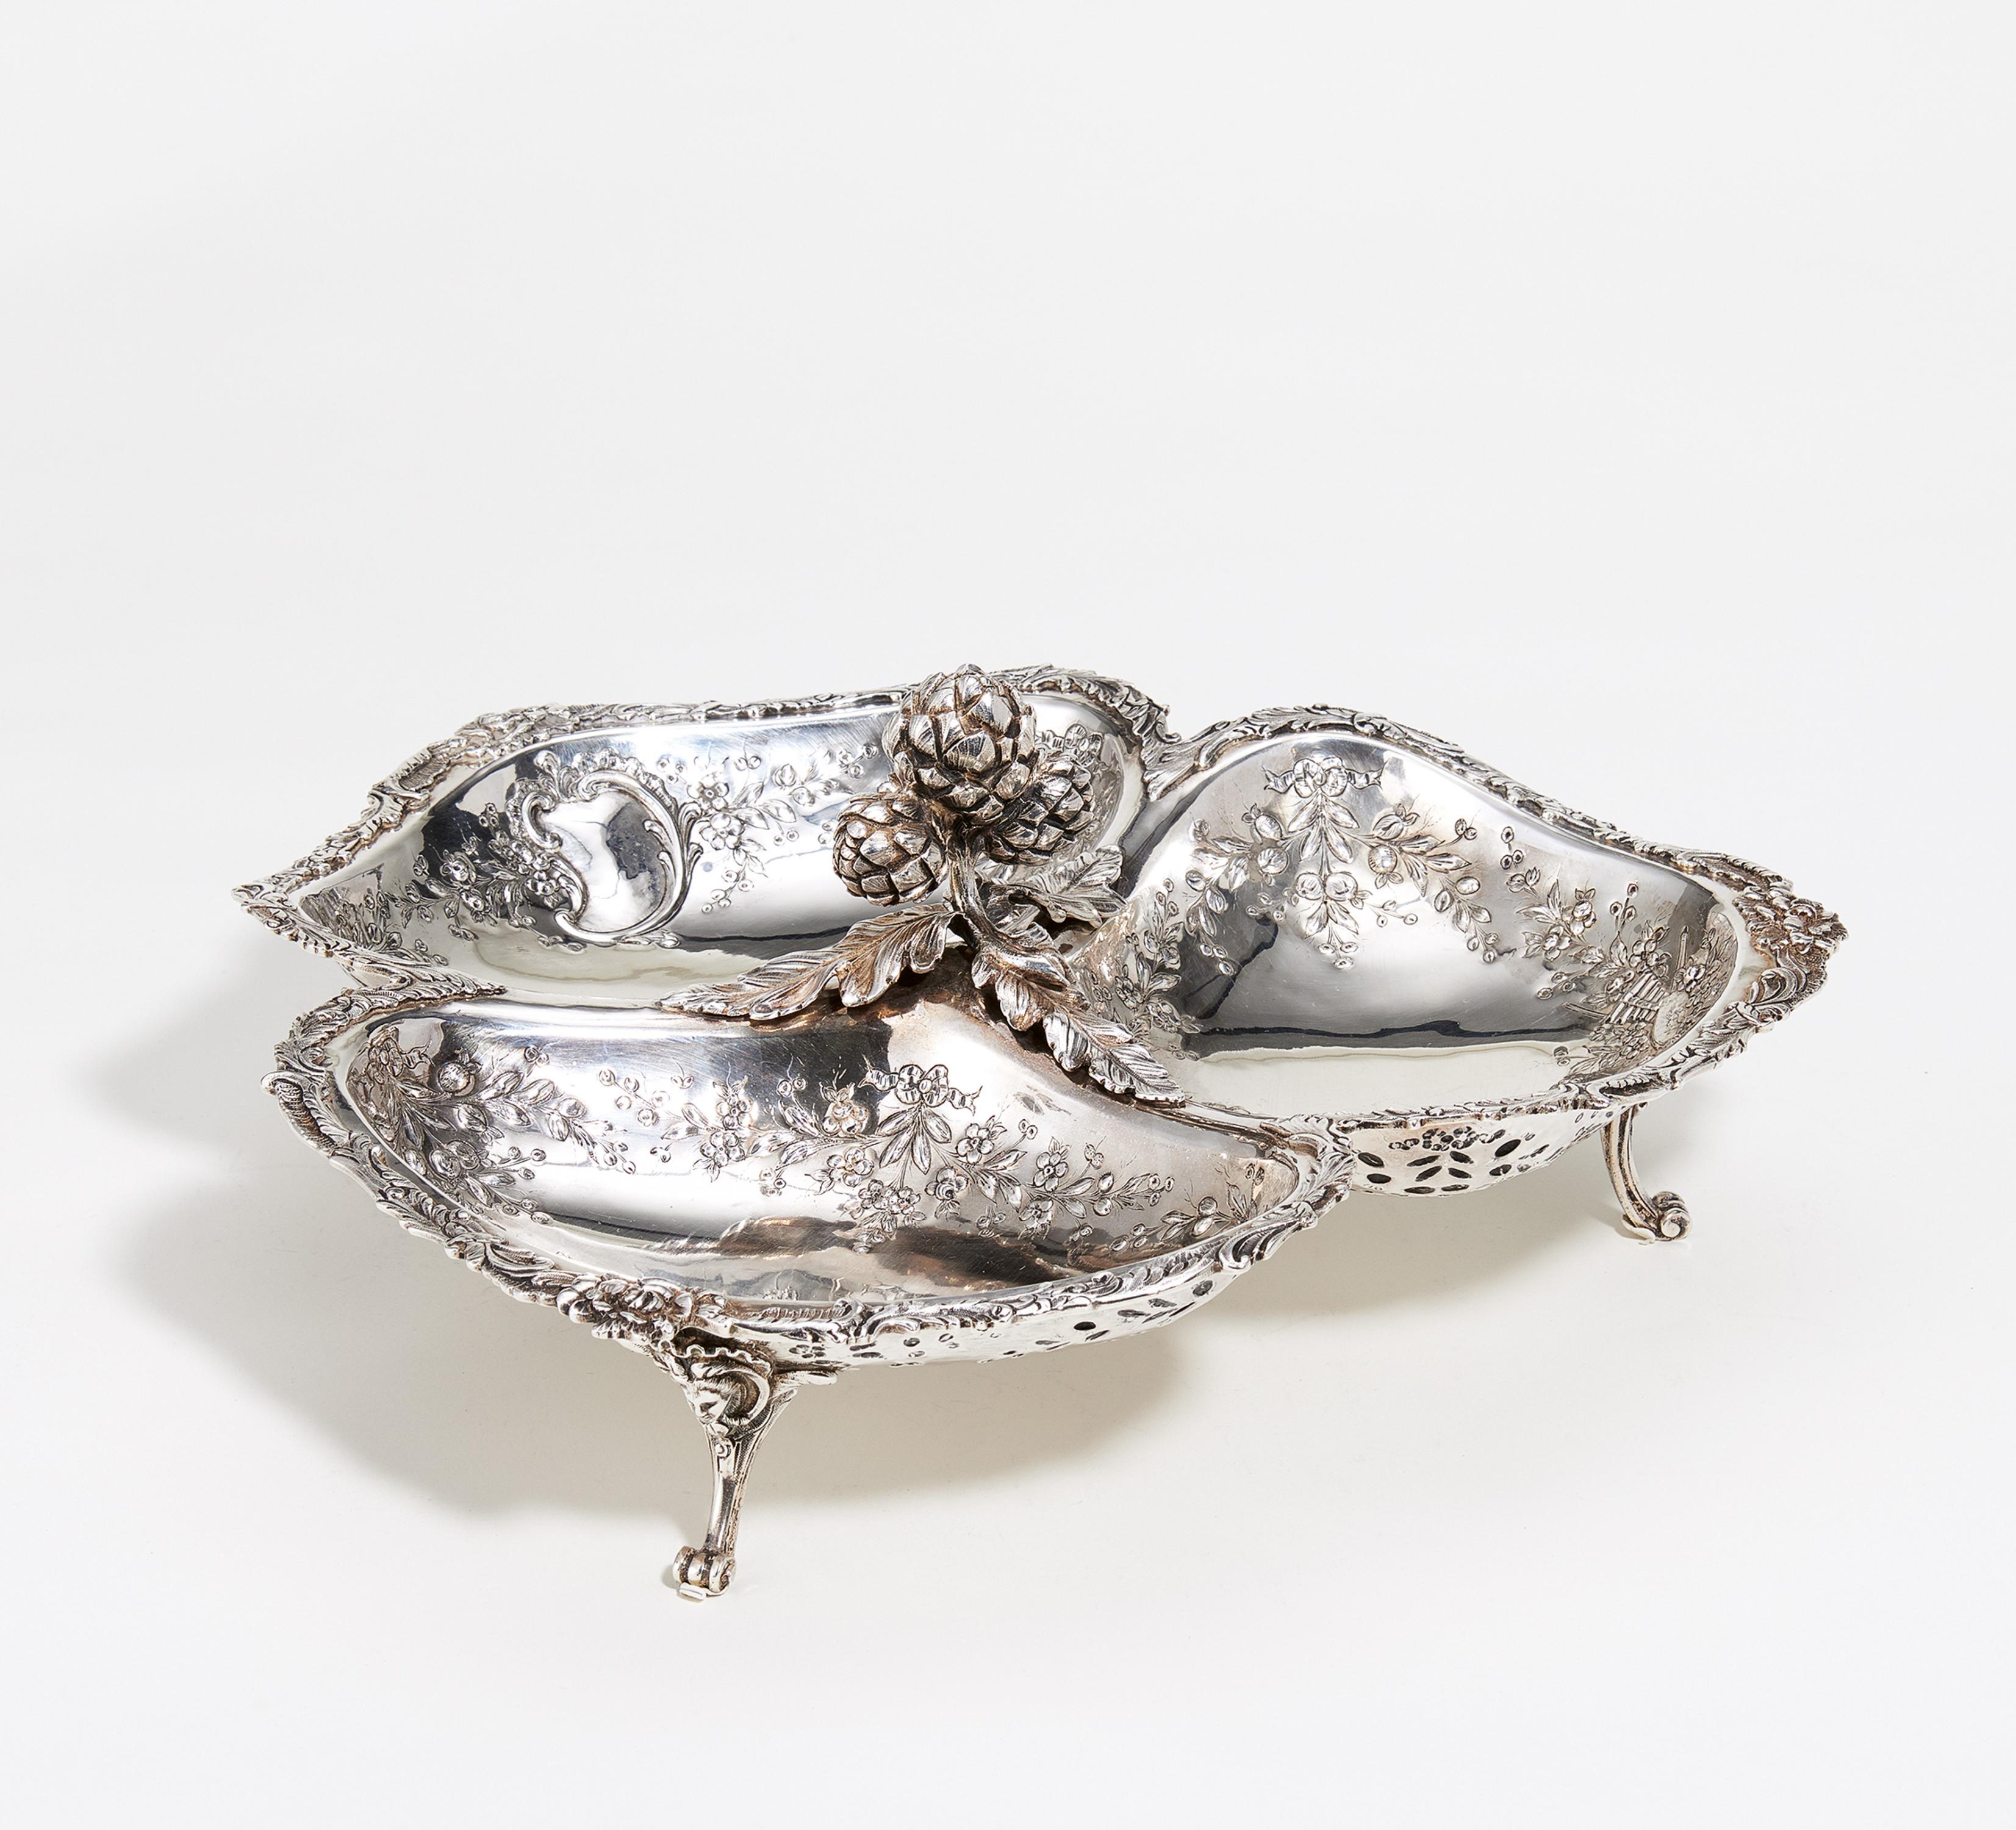 Three-part silver serving bowl with artichoke handle